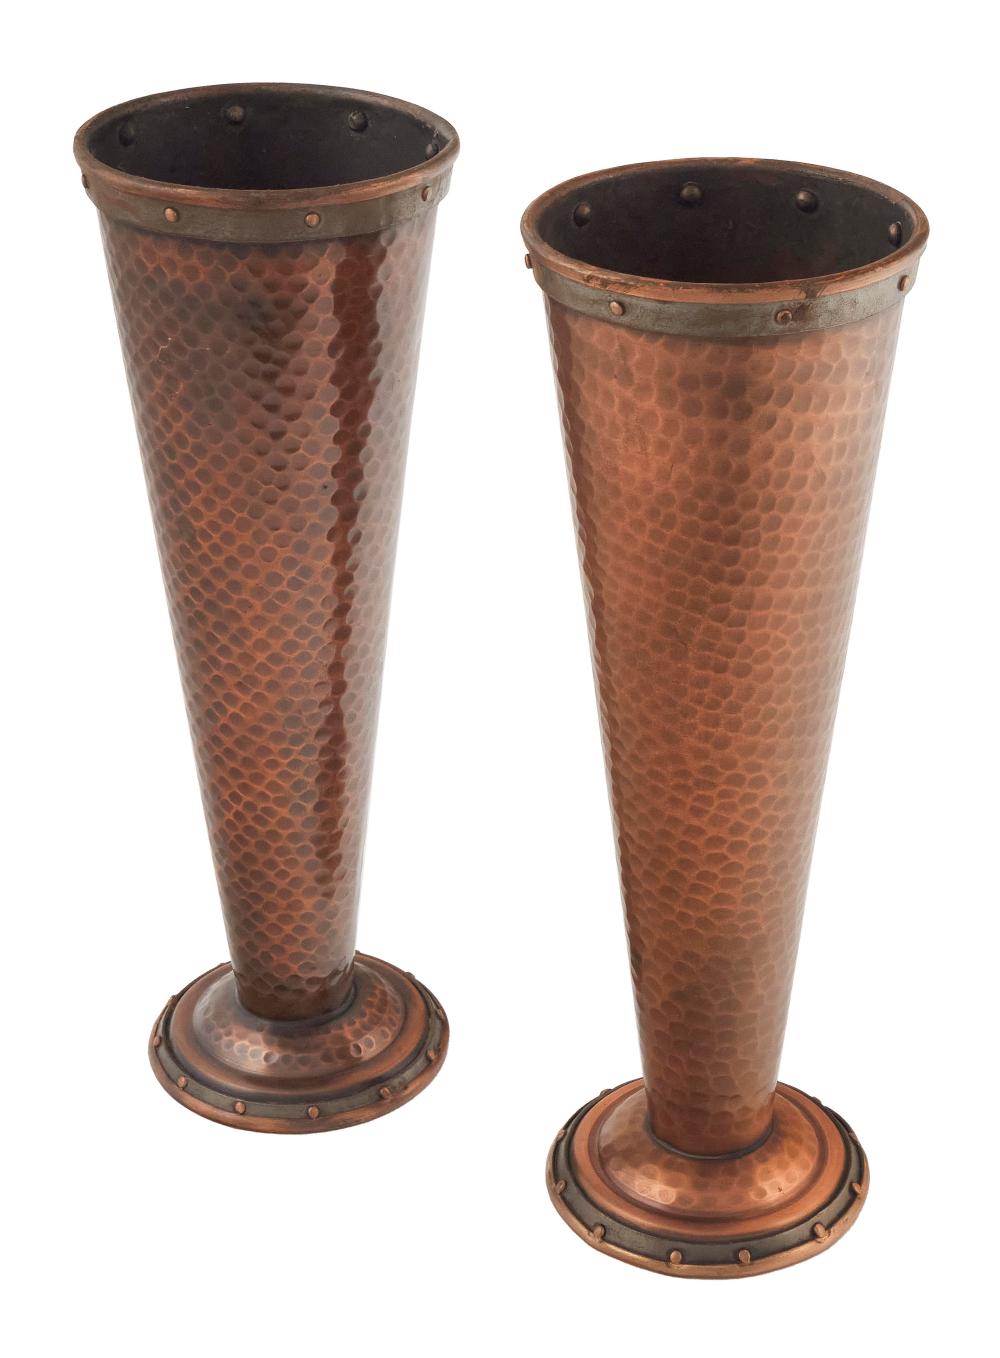 PAIR OF HAND HAMMERED COPPER VASES 2f18ef